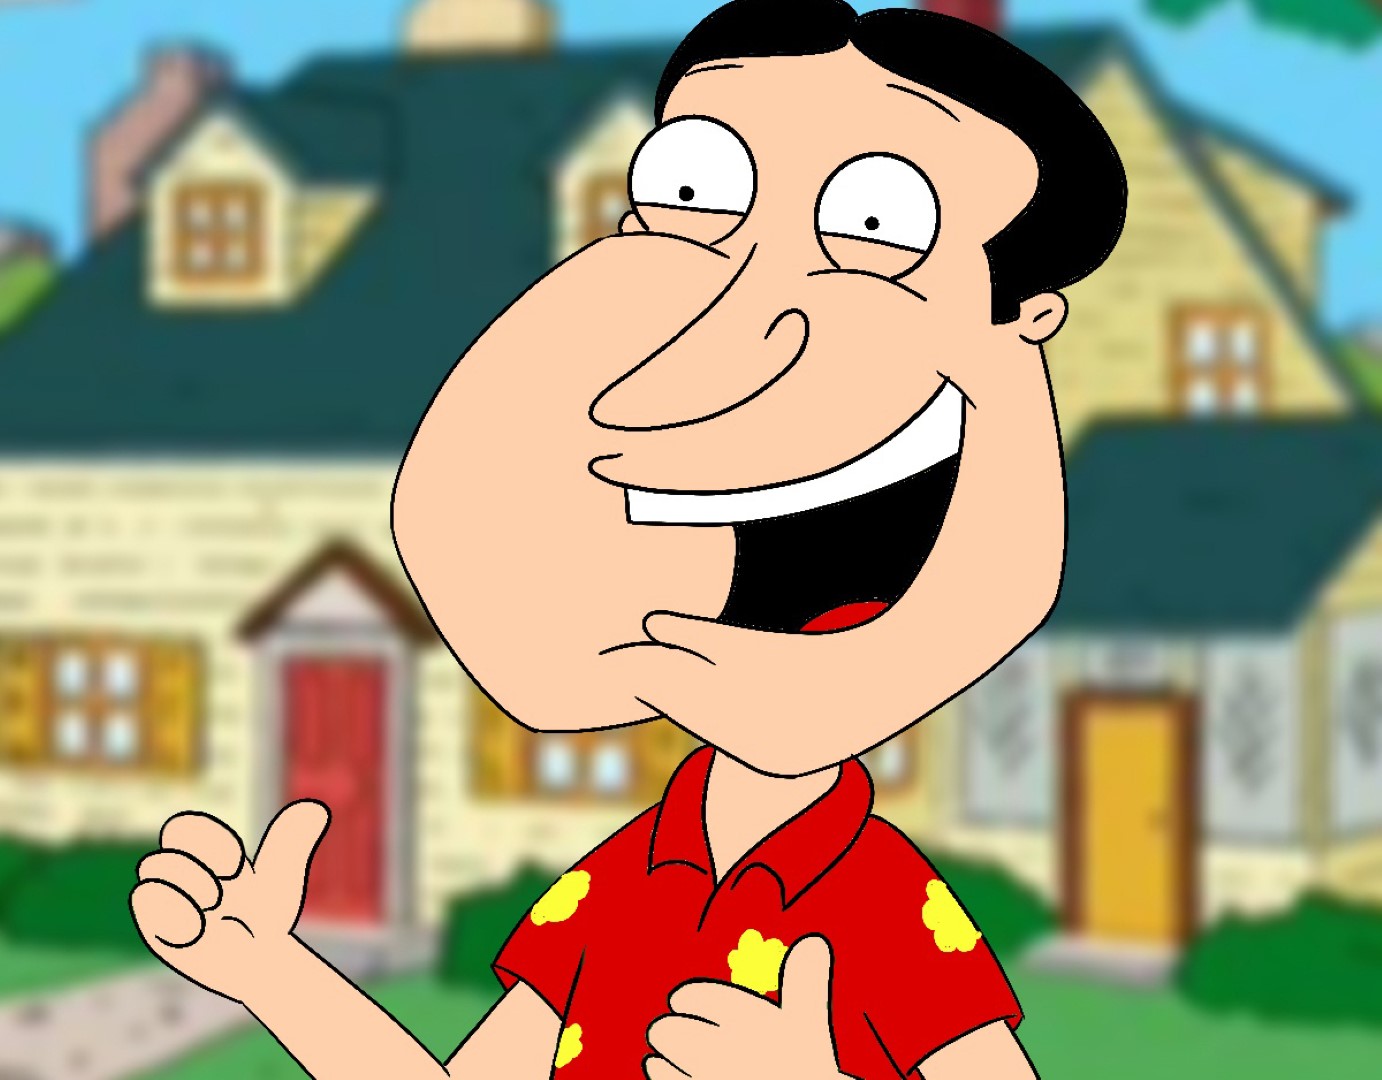 How To Draw Quagmire From Family Guy - Draw Central.